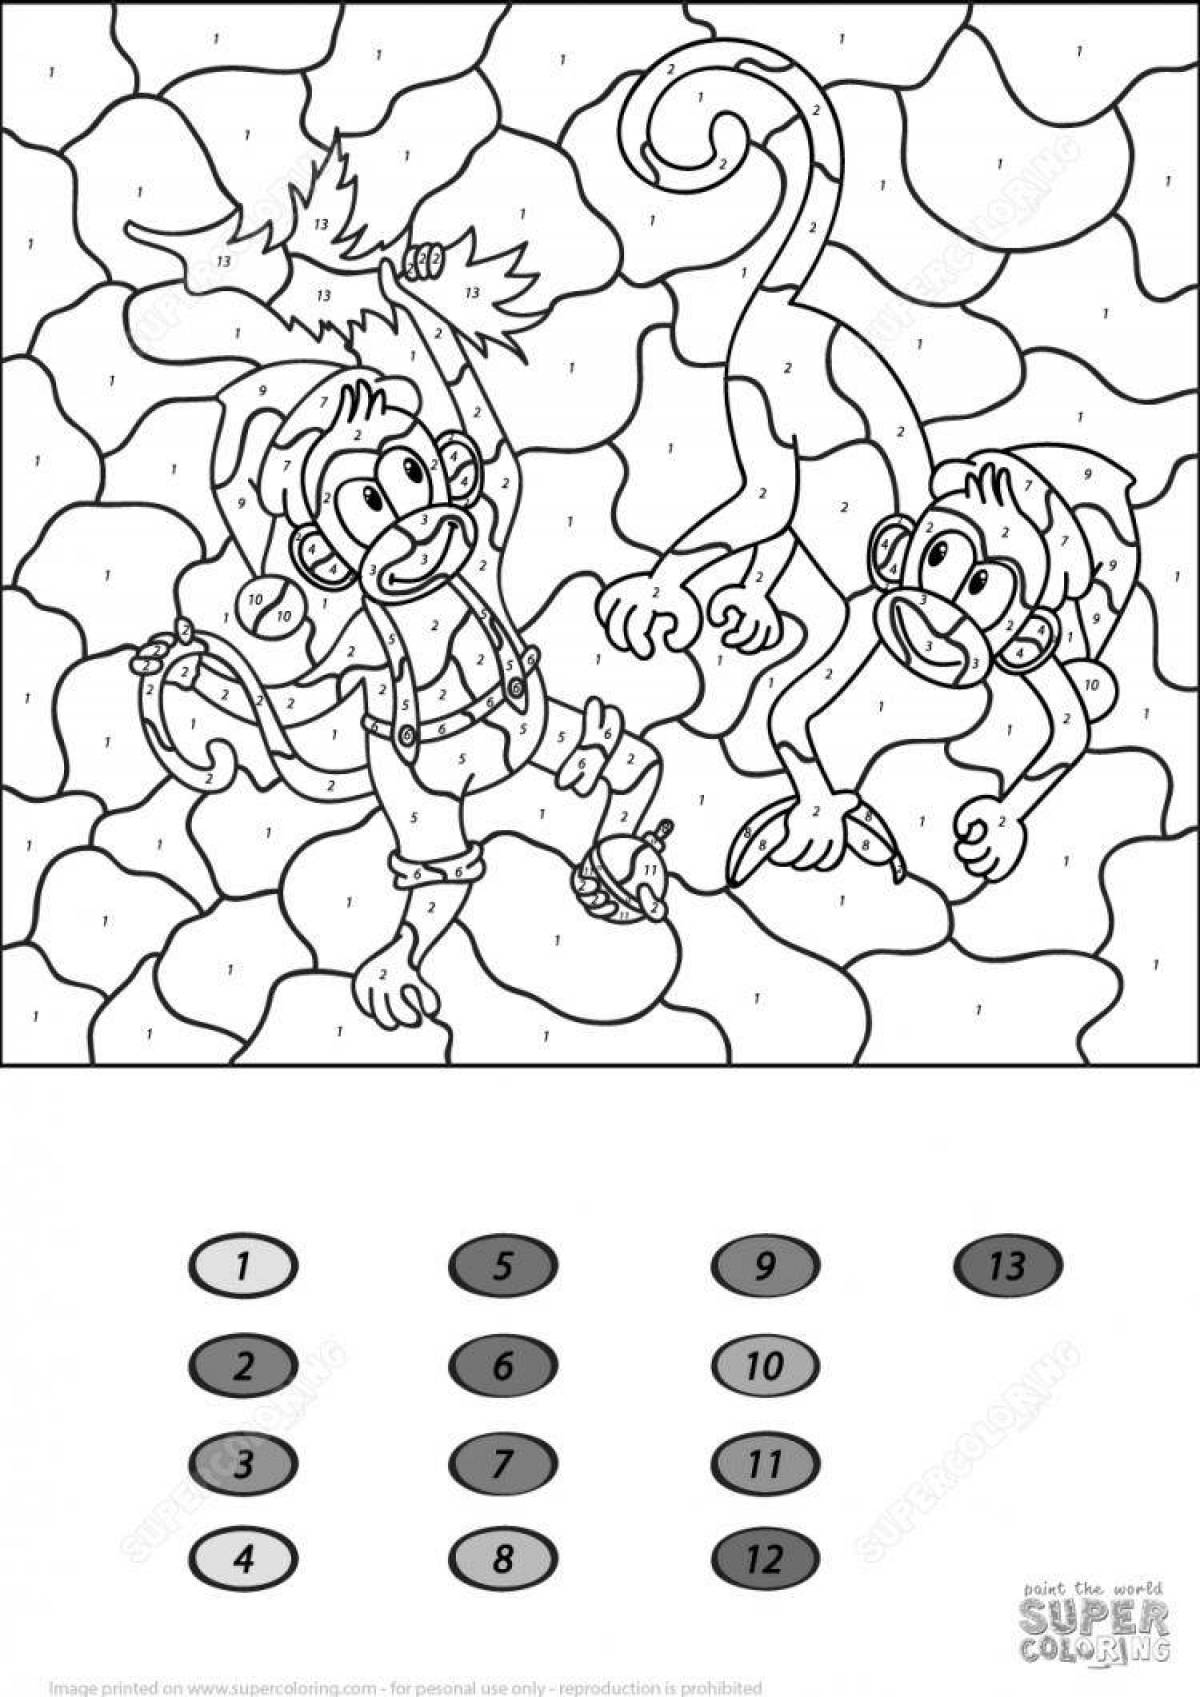 Bright phone games by numbers coloring book